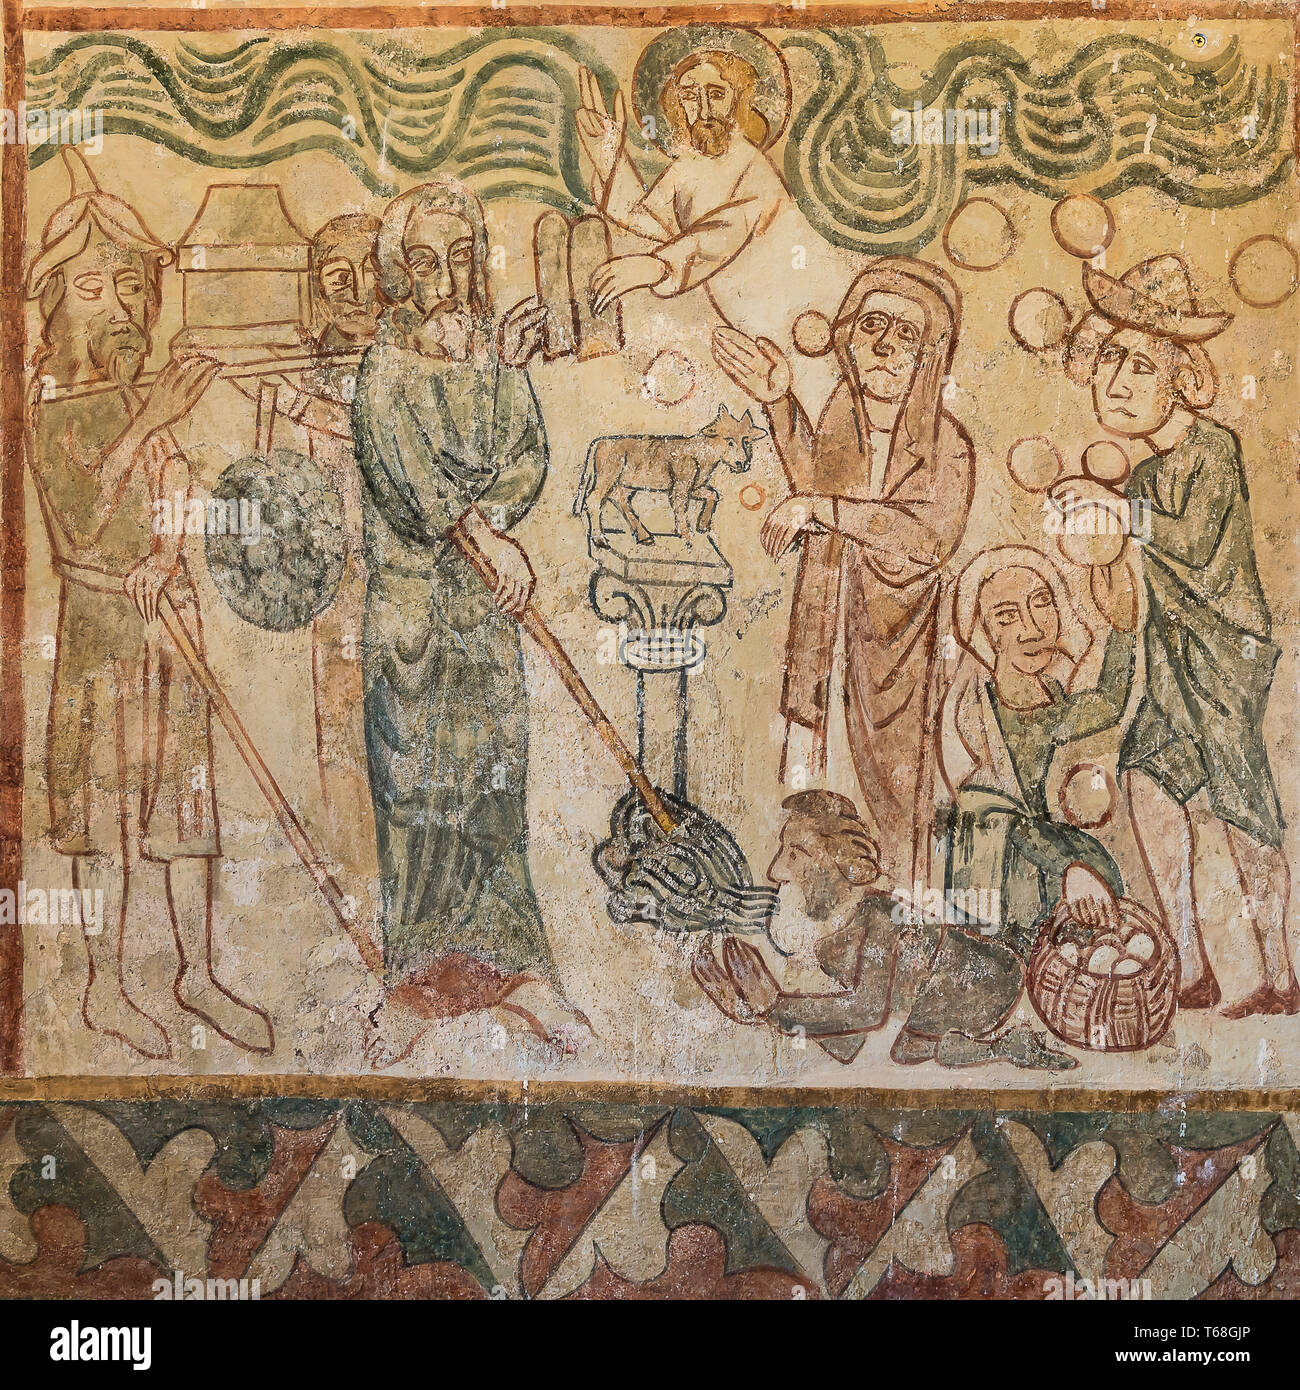 Stories from the old testament, a 500 years old gotic wall-painting in Tirsted church, Denmark, April 17, 2019 Stock Photo